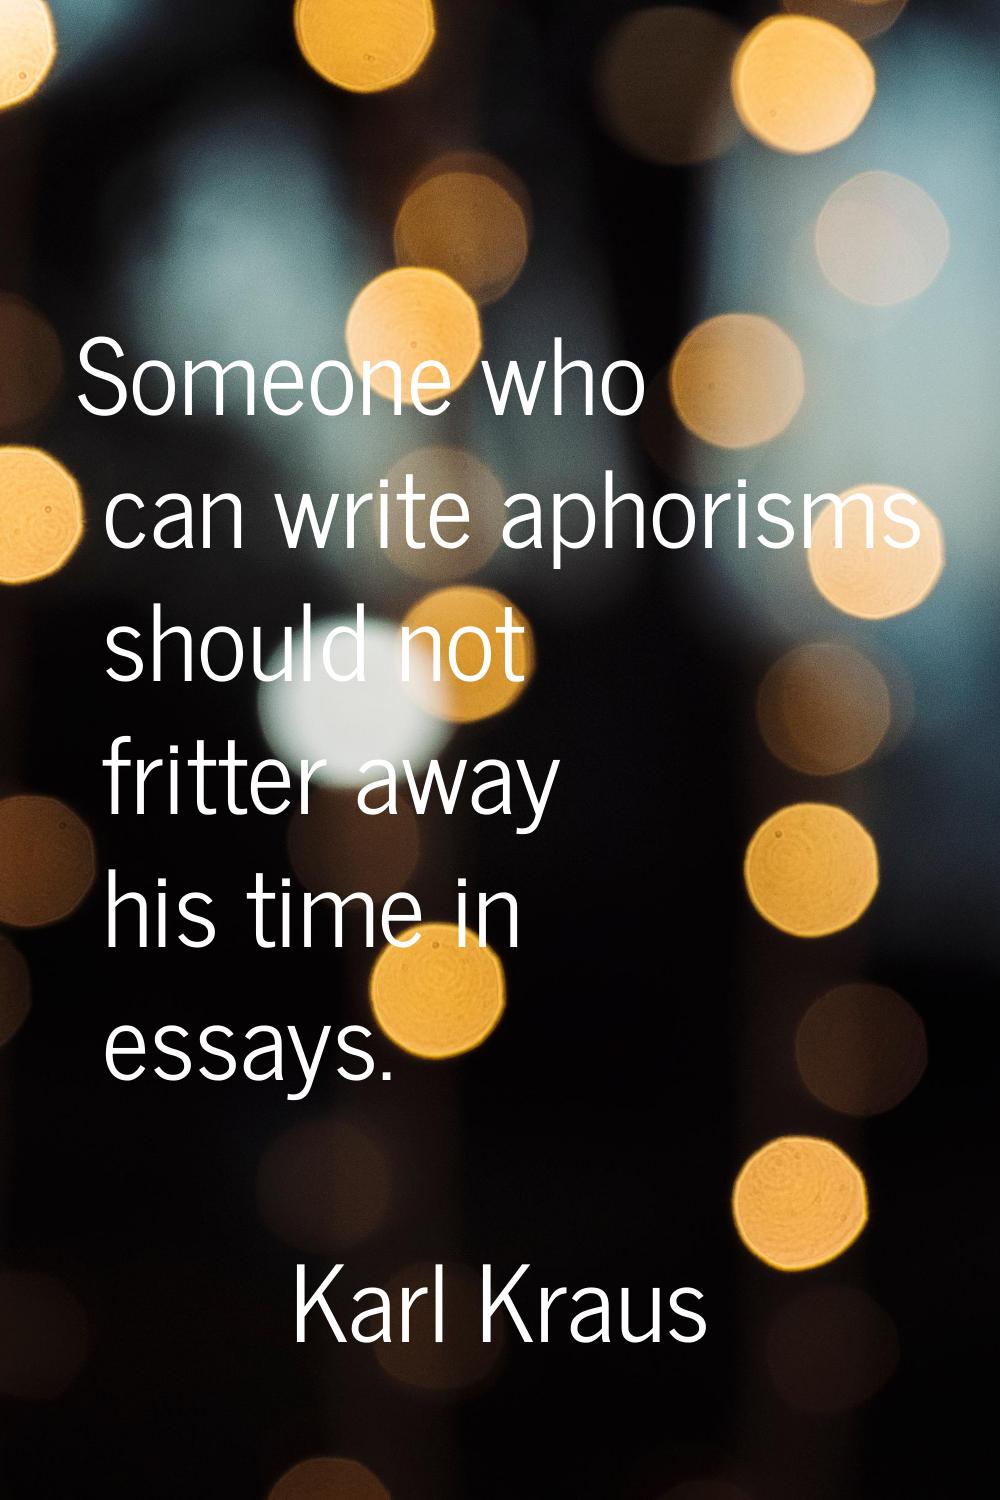 Someone who can write aphorisms should not fritter away his time in essays.